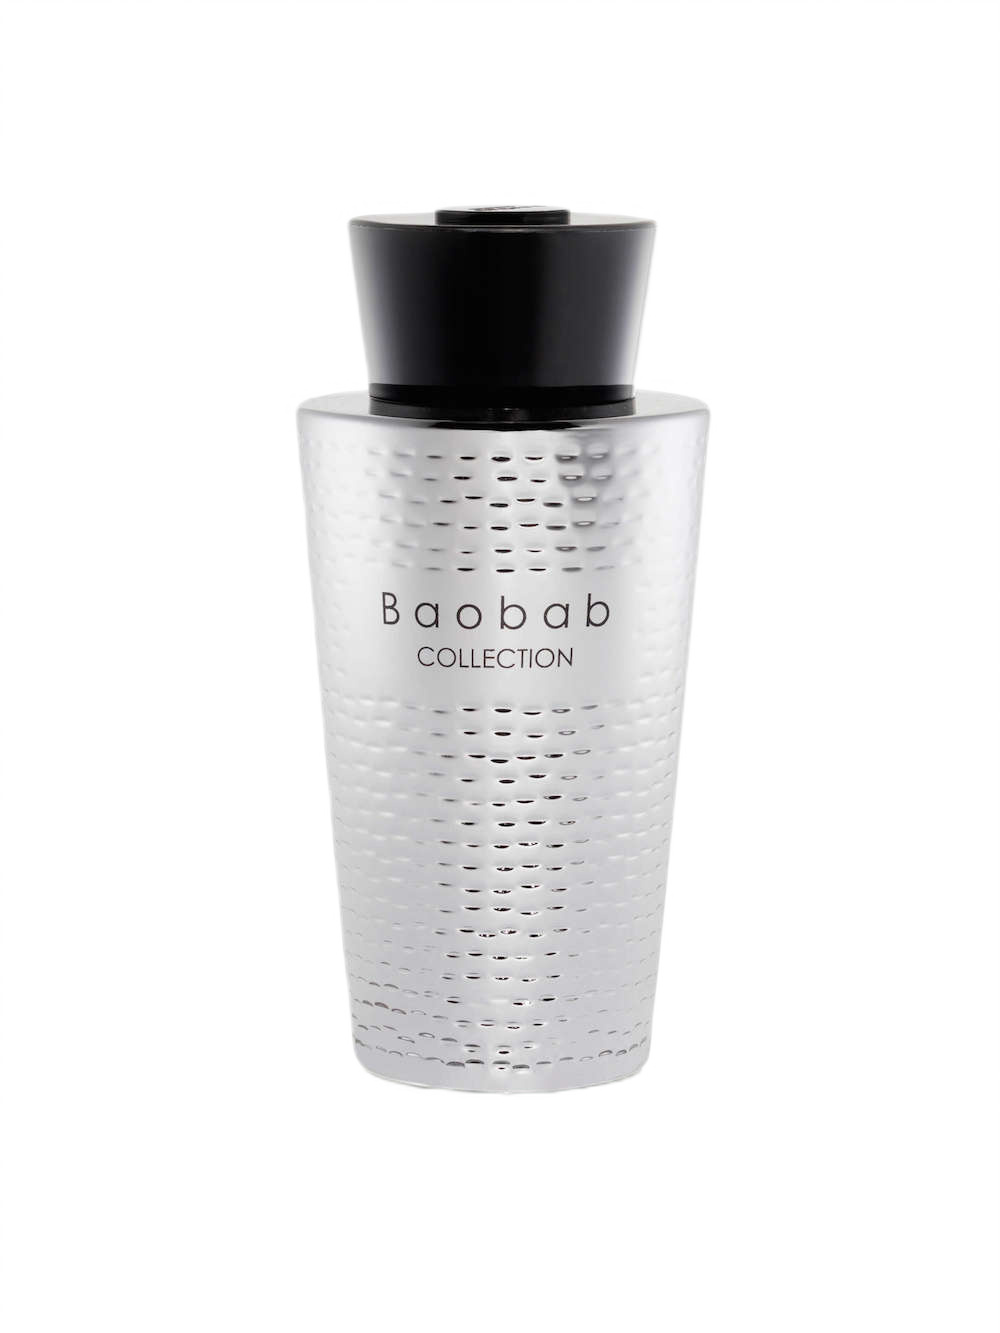  BAOBAB COLLECTION, Kheops Diffuser, SKU: LODGEKPS | watchapproach.com